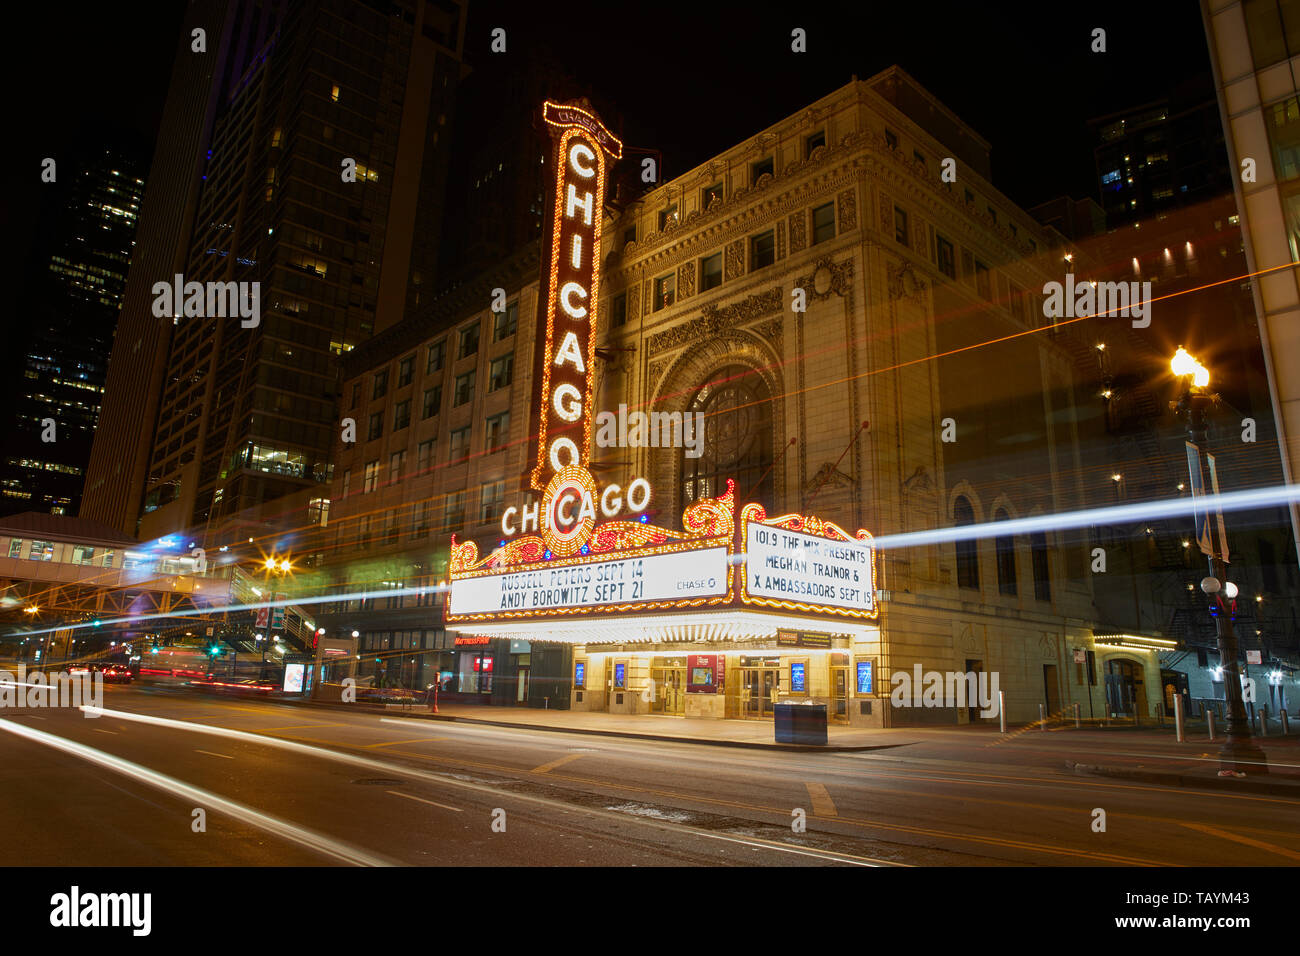 The iconic Chicago theater sign by night, Chicago, Illinois, United States Stock Photo